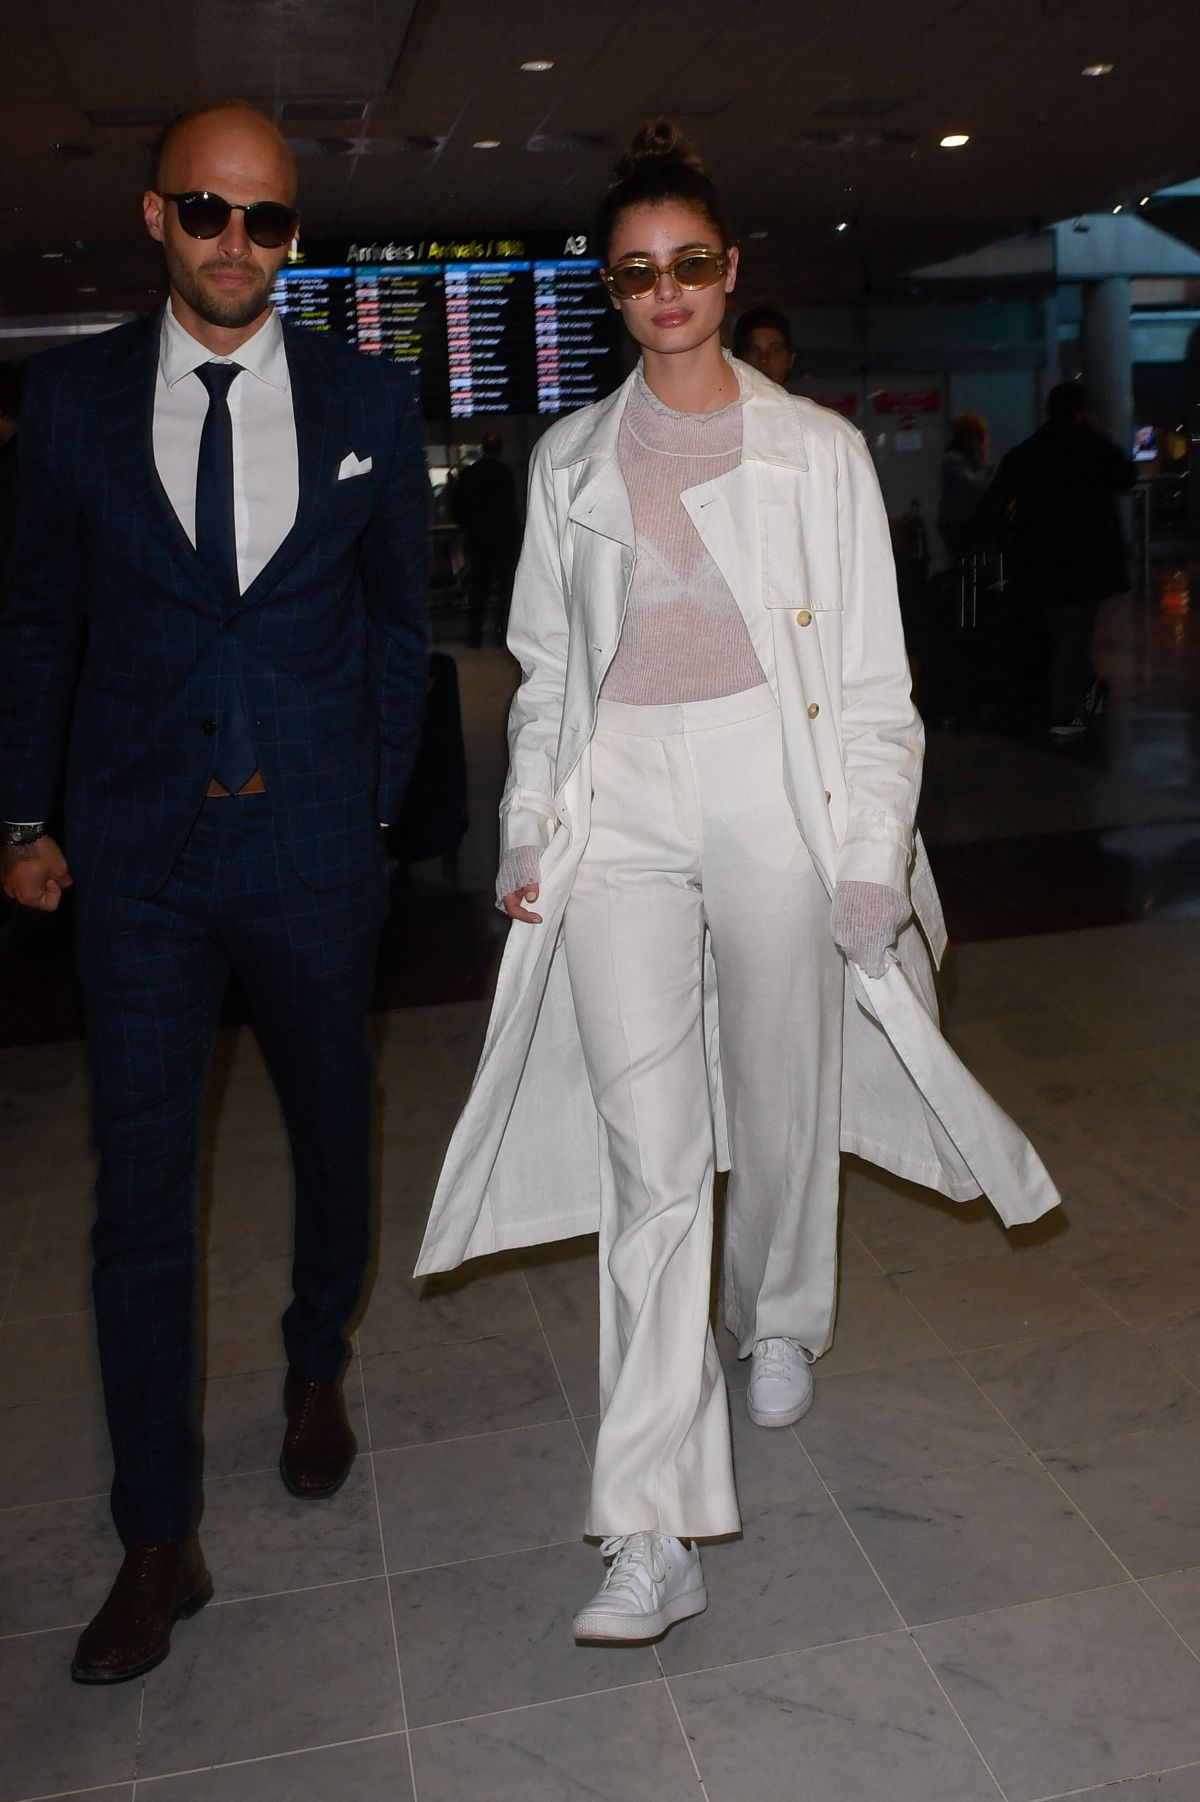 taylor-hill-arrives-at-nice-airport-05-16-2019-4.jpg